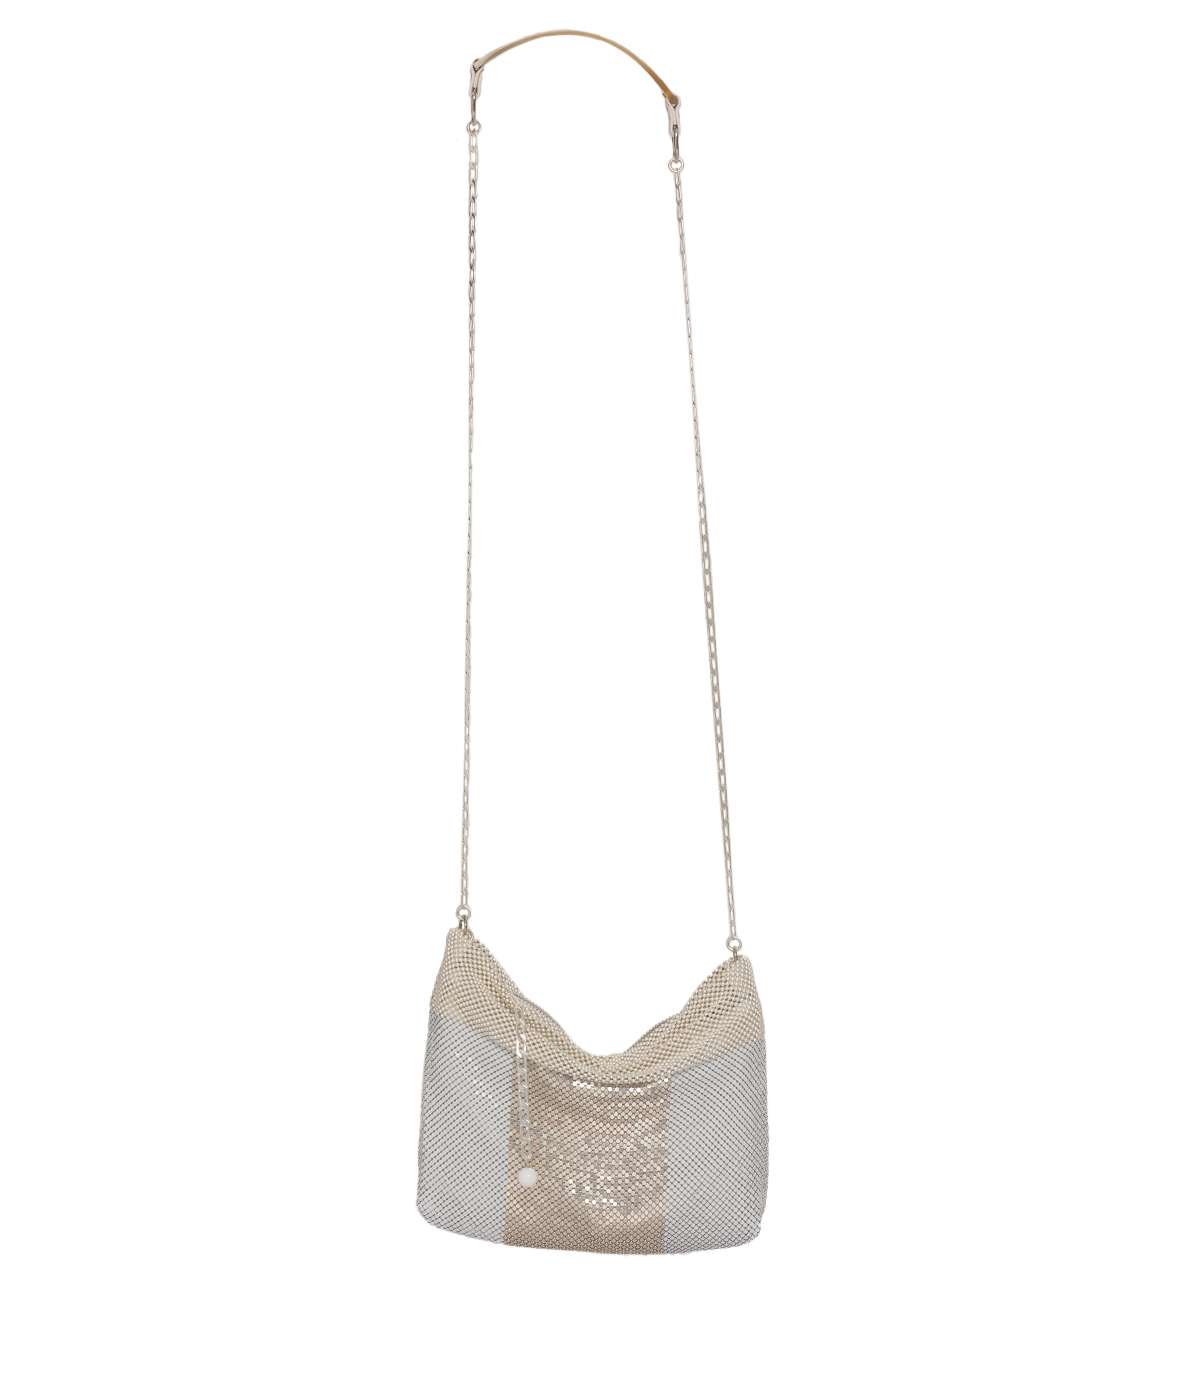 Blanca Party Bag in White